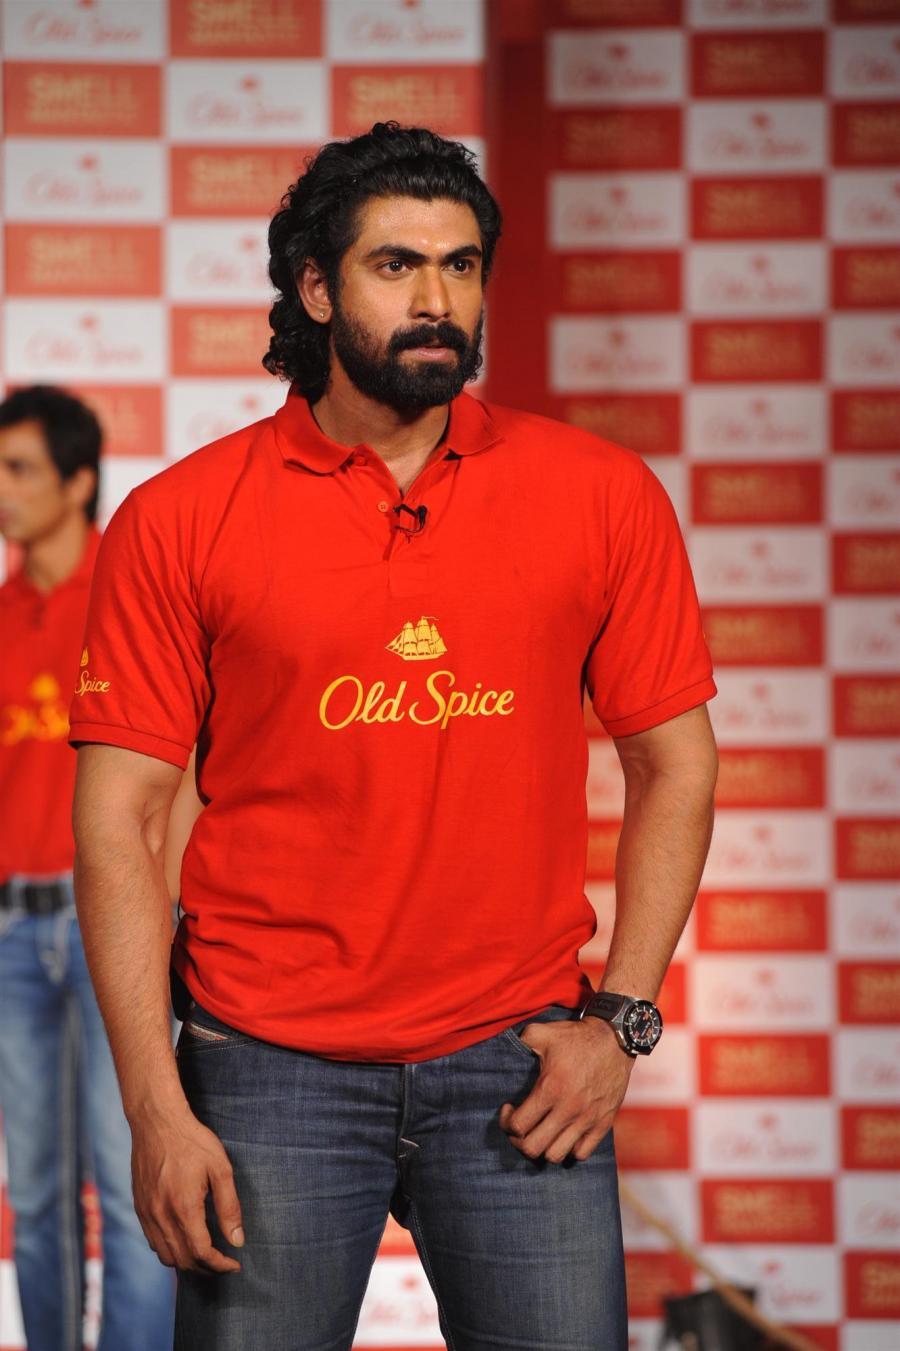 Actor Rana Daggubati during the launch of the Old Spice deodorant by Procter and Gamble India (P&G) in Mumbai on November 19, 2013. (Photo: IANS)